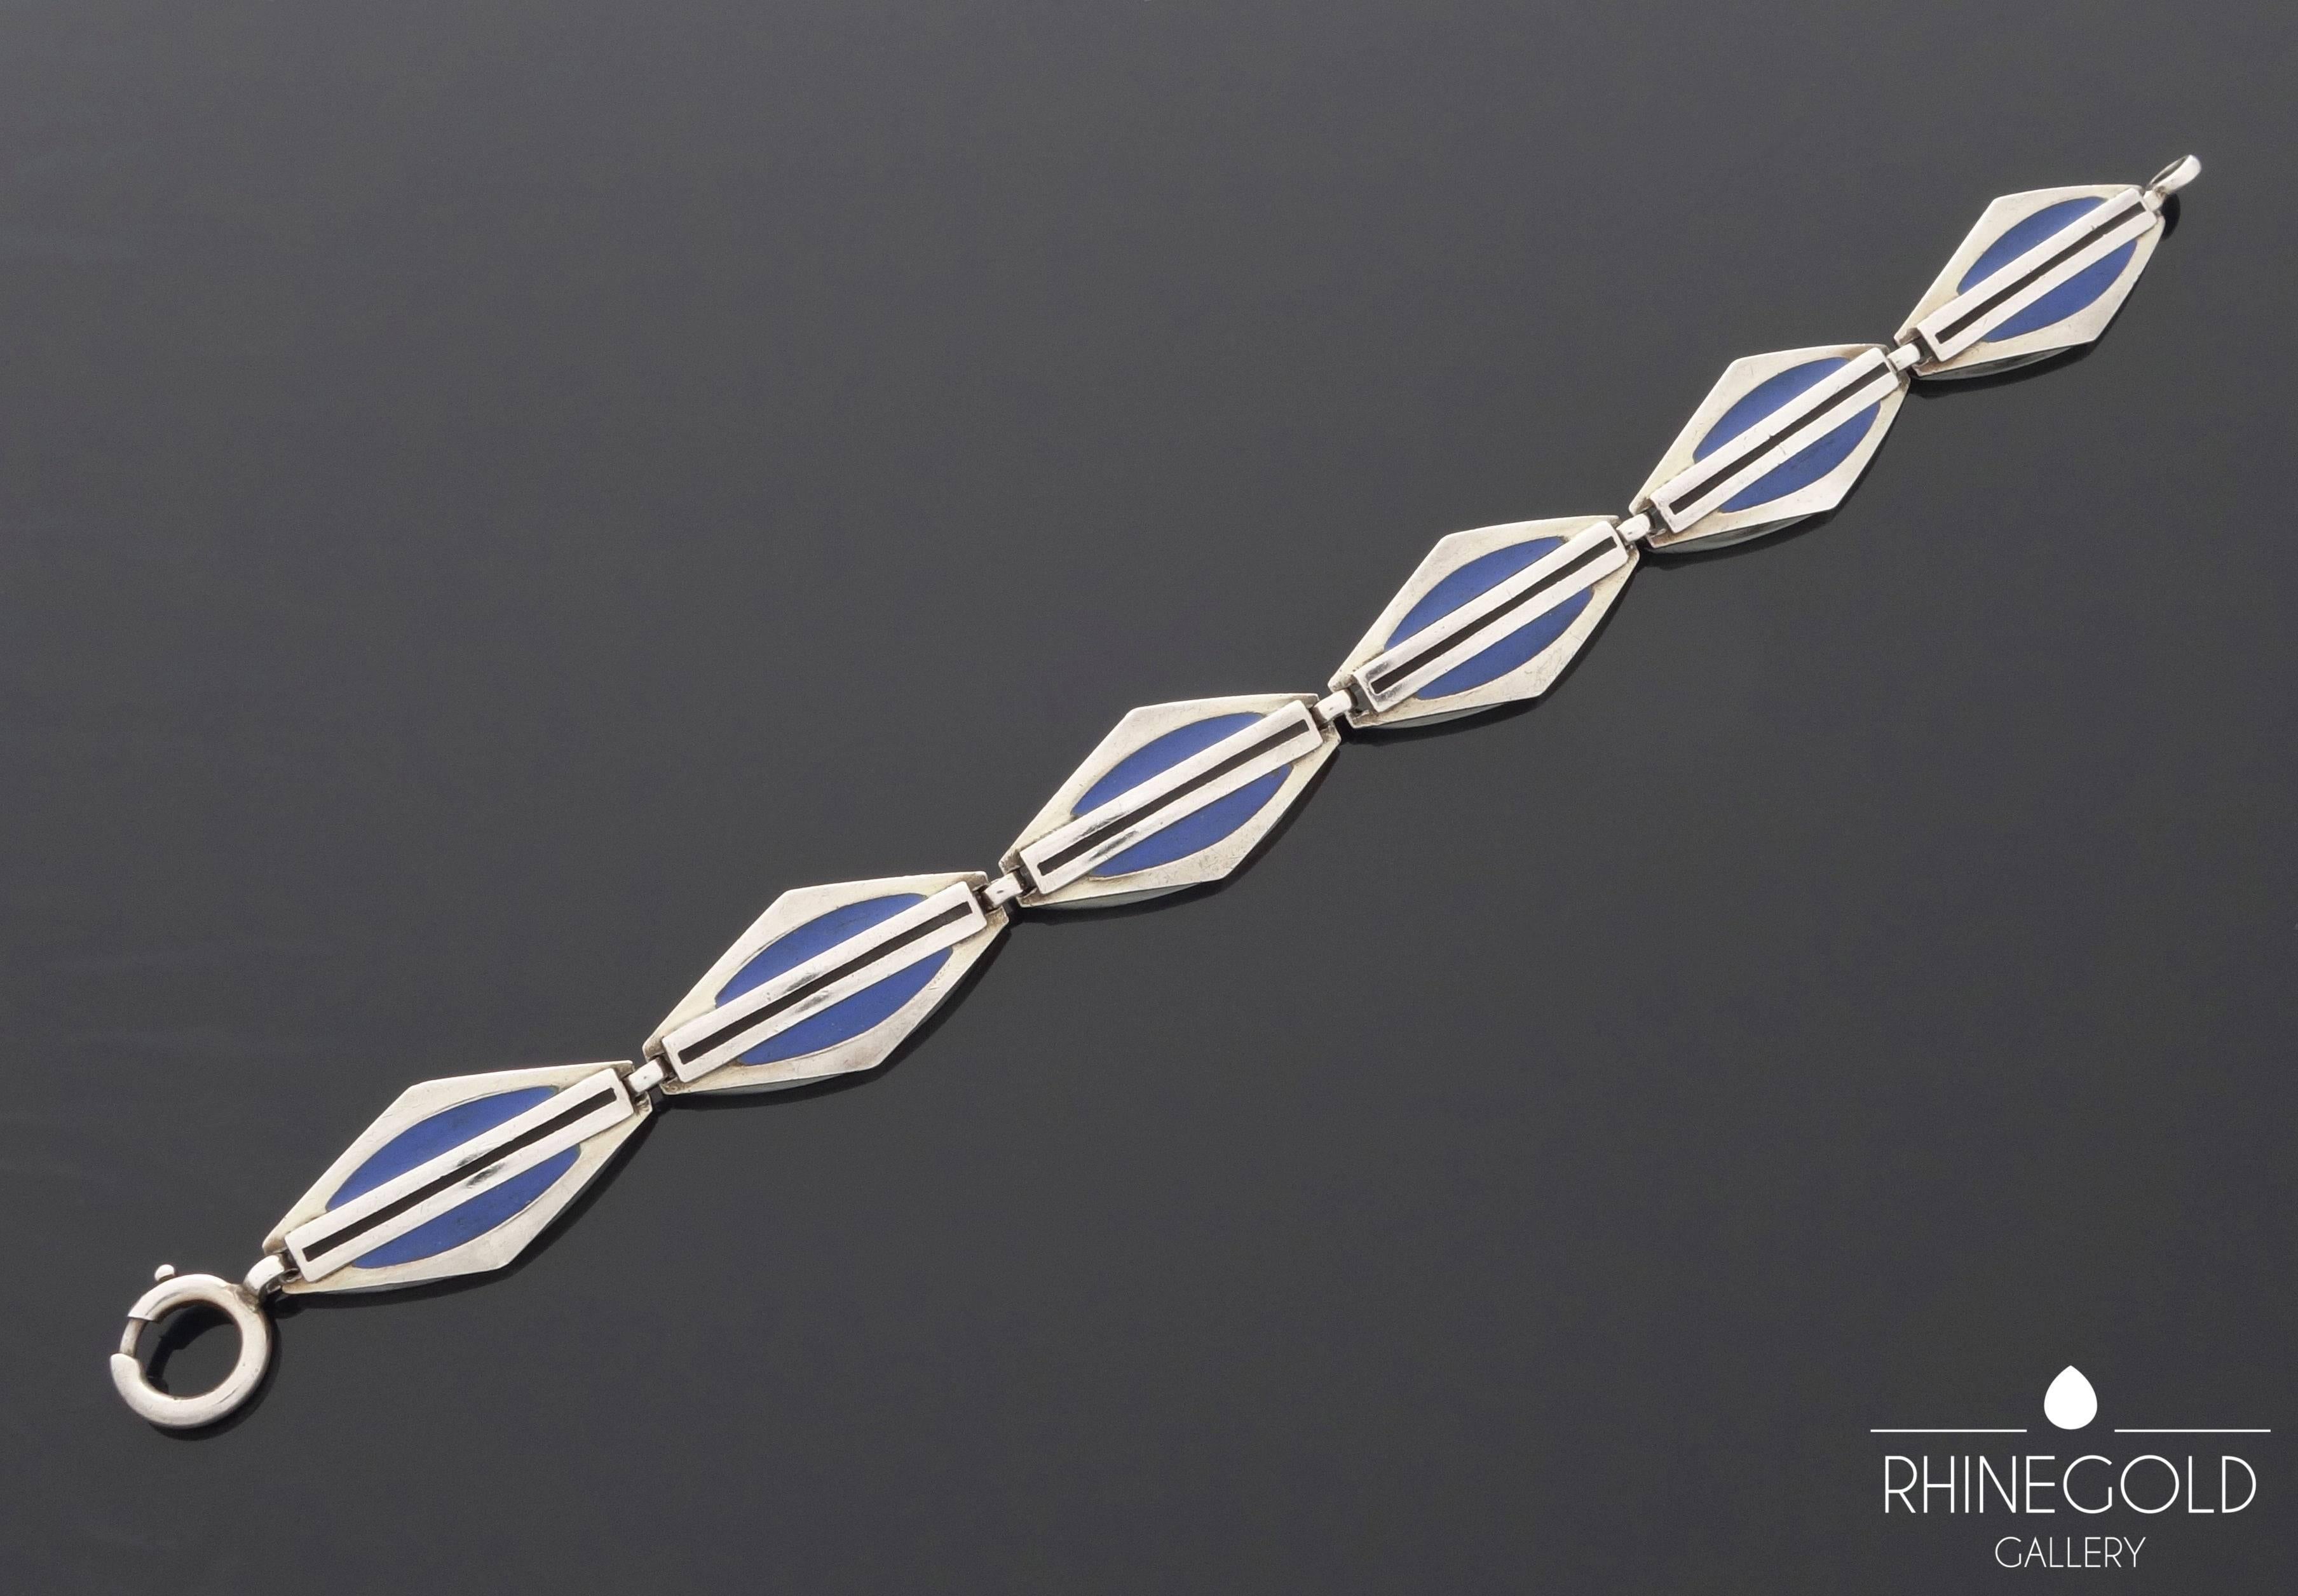 1920s Theodor Fahrner Art Deco Matte Enamel Silver Bracelet
Silver 935, matte enamel in lagoon blue and black
Lenght 18.5 cm (approx. 7 1/4"), width 1.5 cm (approx. 5/8")
Marks: ligated “TF” in a circle; "935"
Germany, ca. 1925